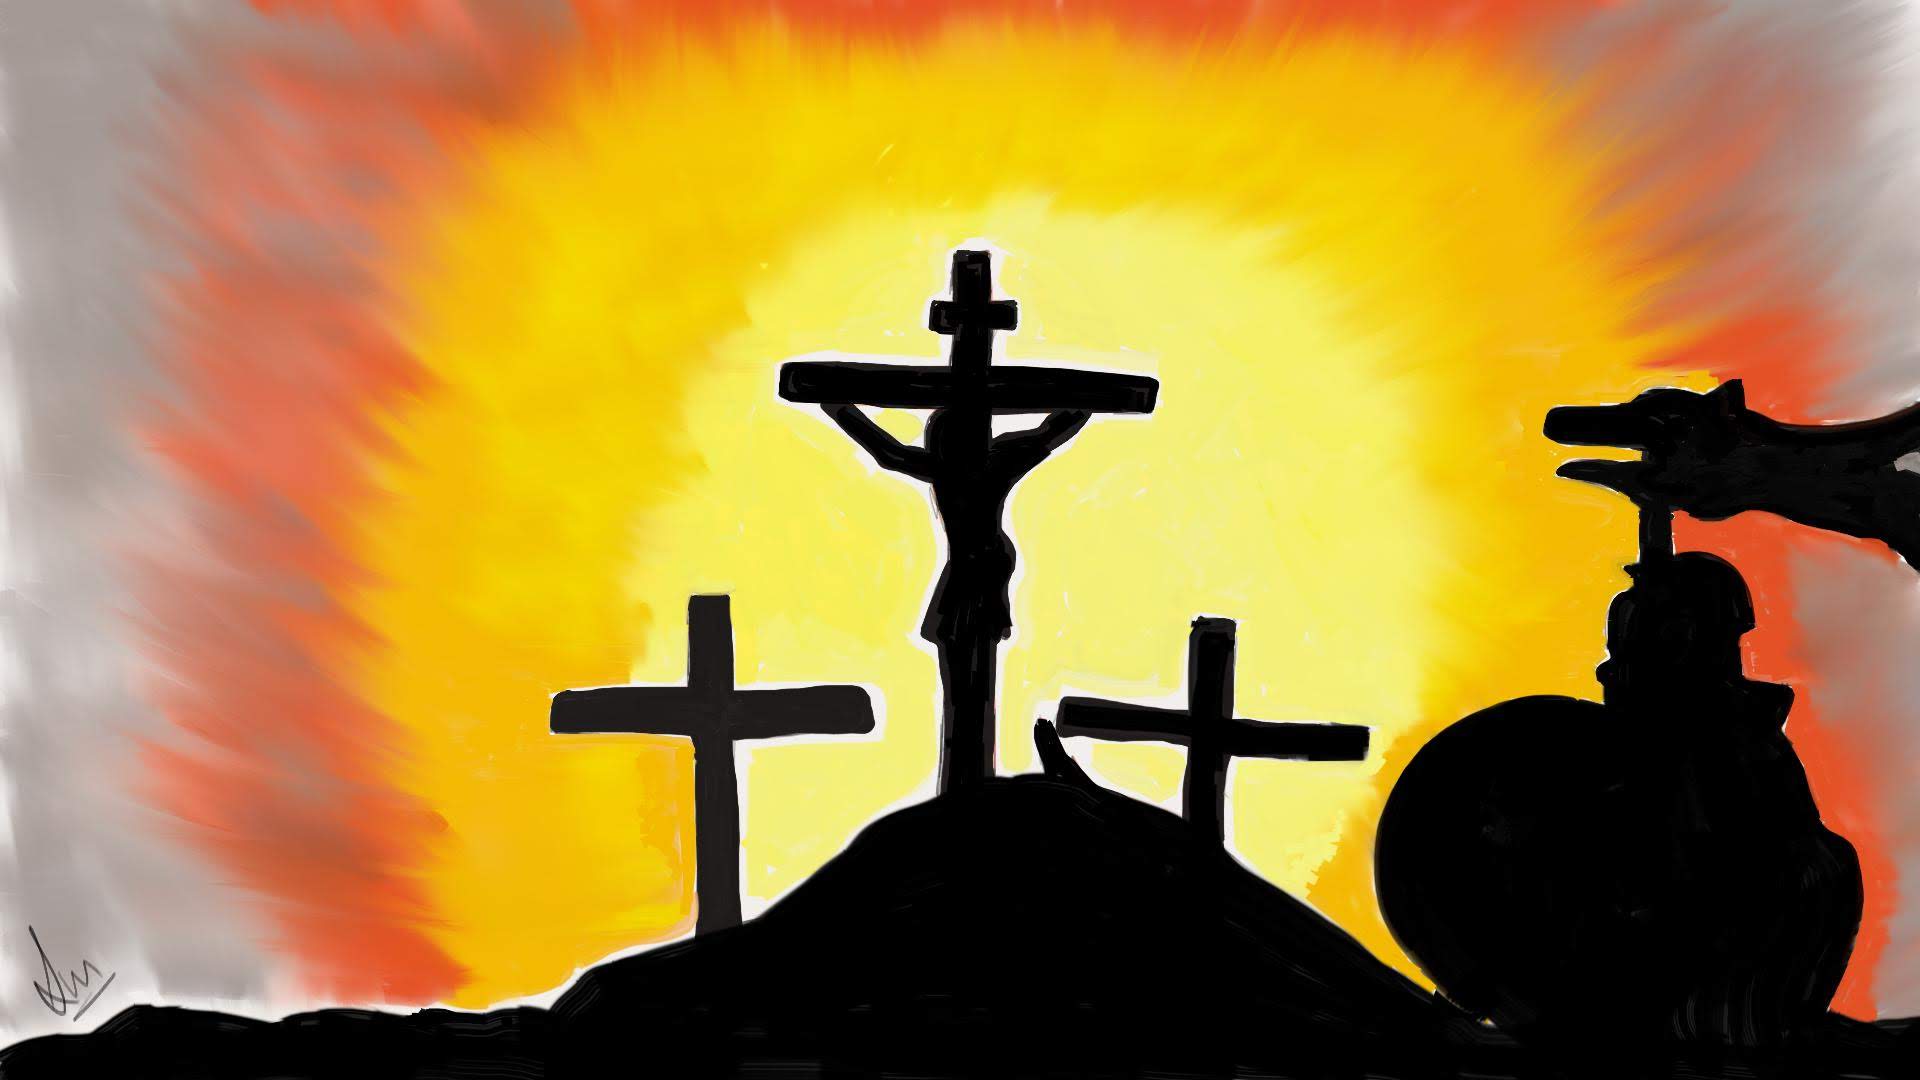 Our Lord and Savior, Jesus Christ hung on the Cross - Digital Painting by Shaalyn Monteiro